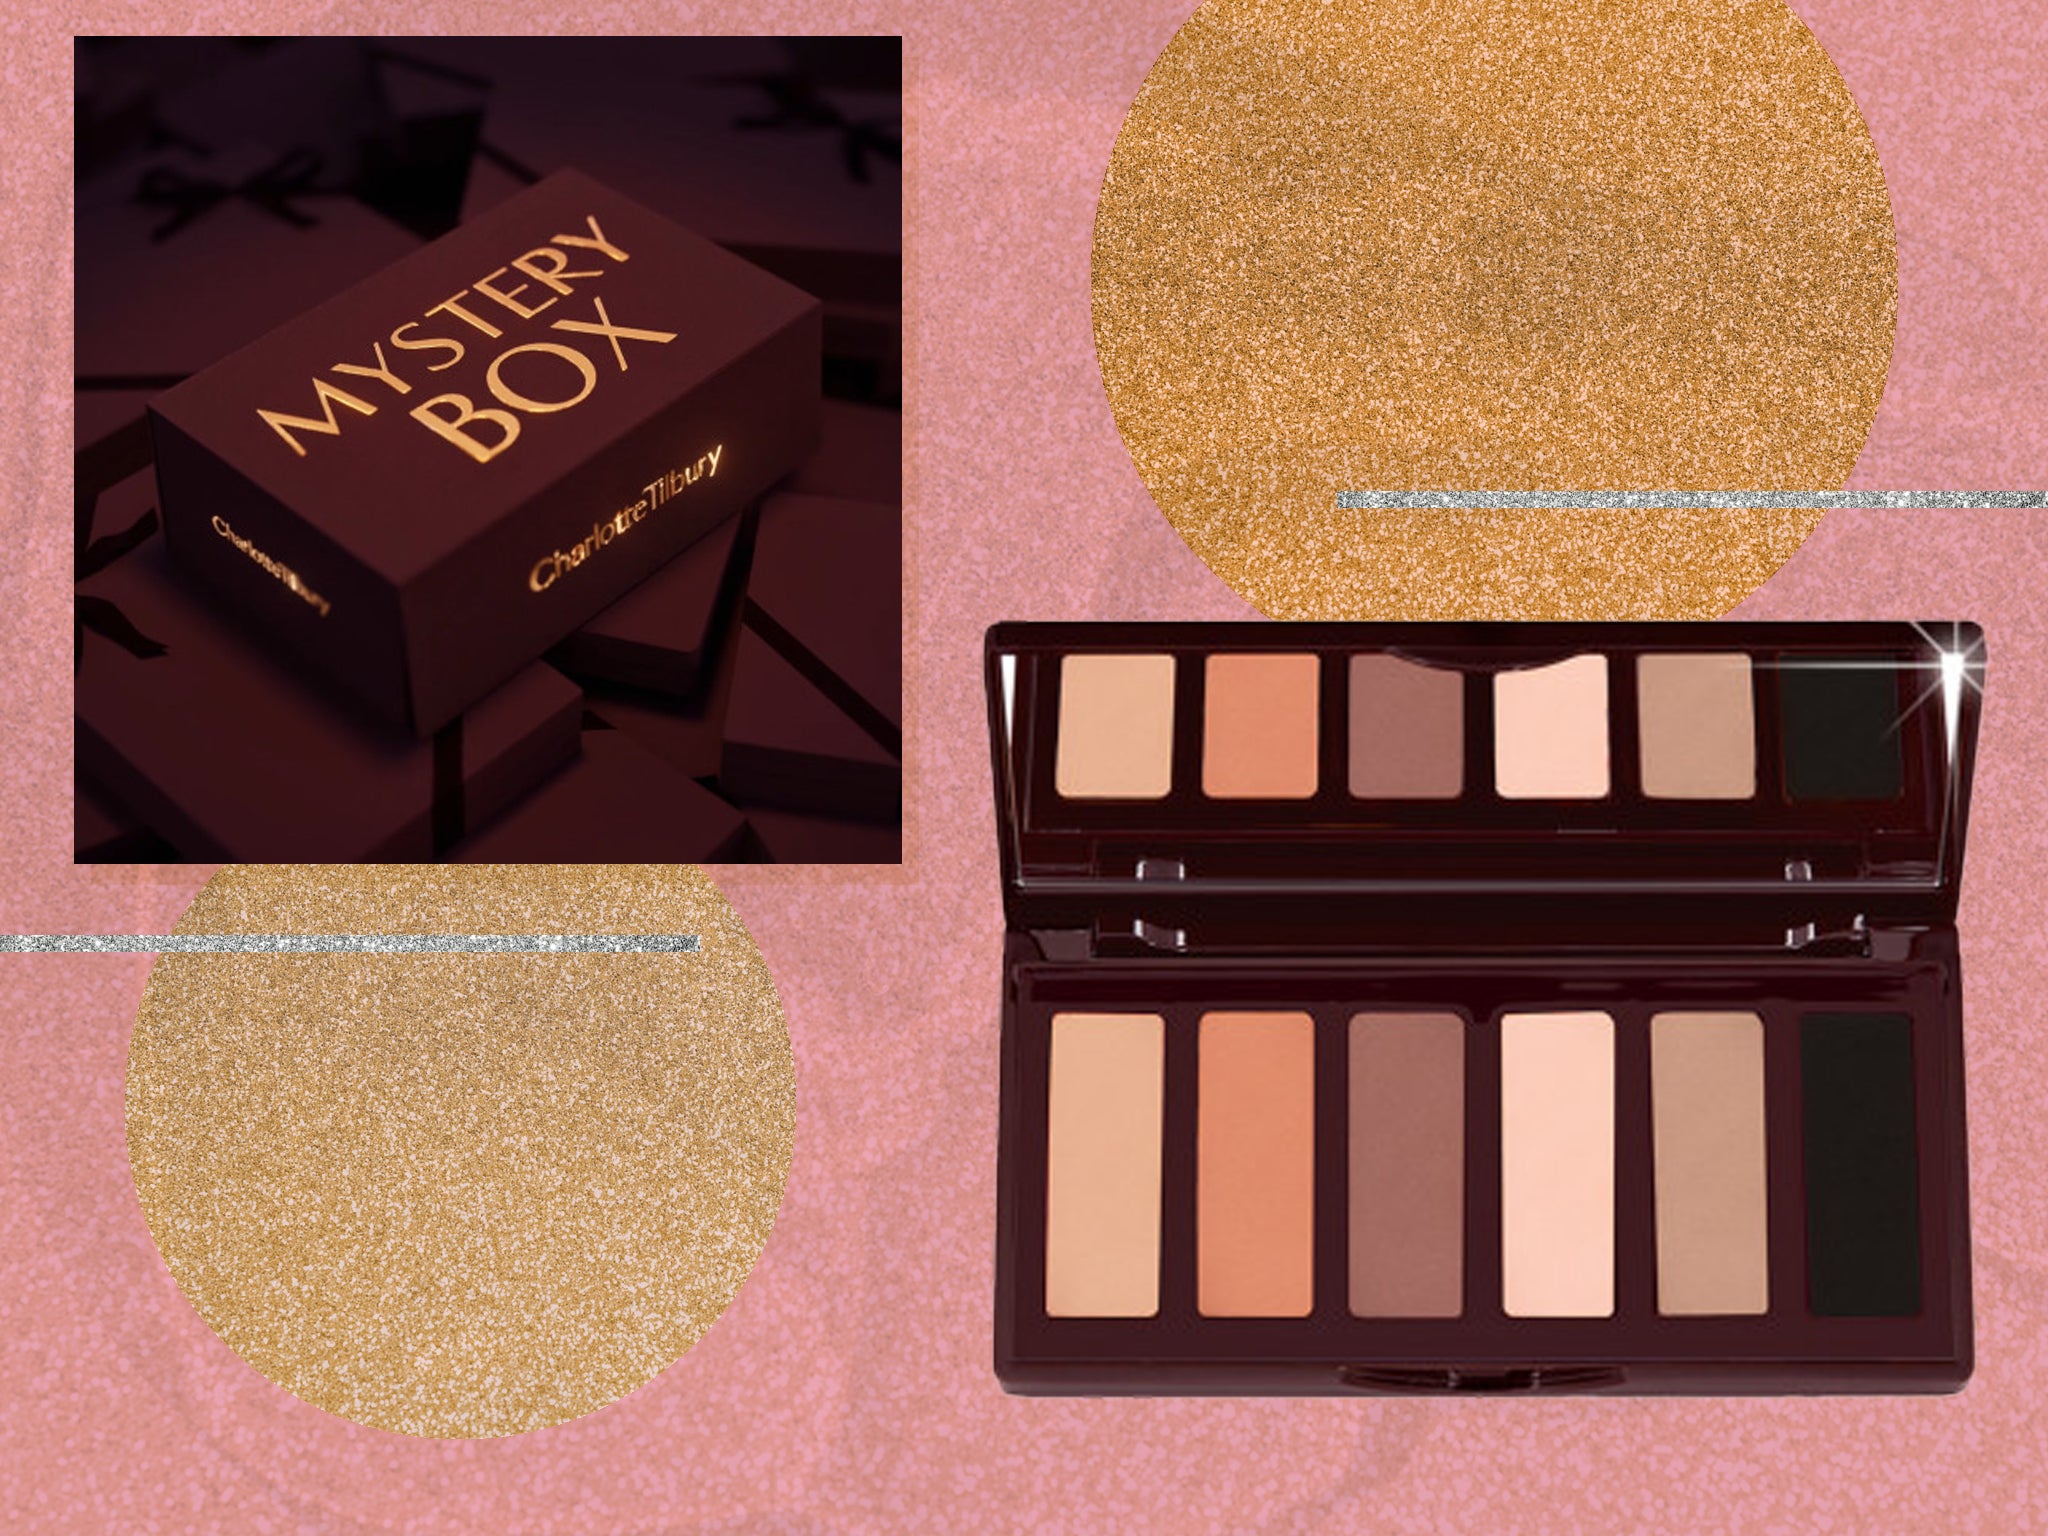 Charlotte Tilbury’s mystery box is back just in time for Christmas 